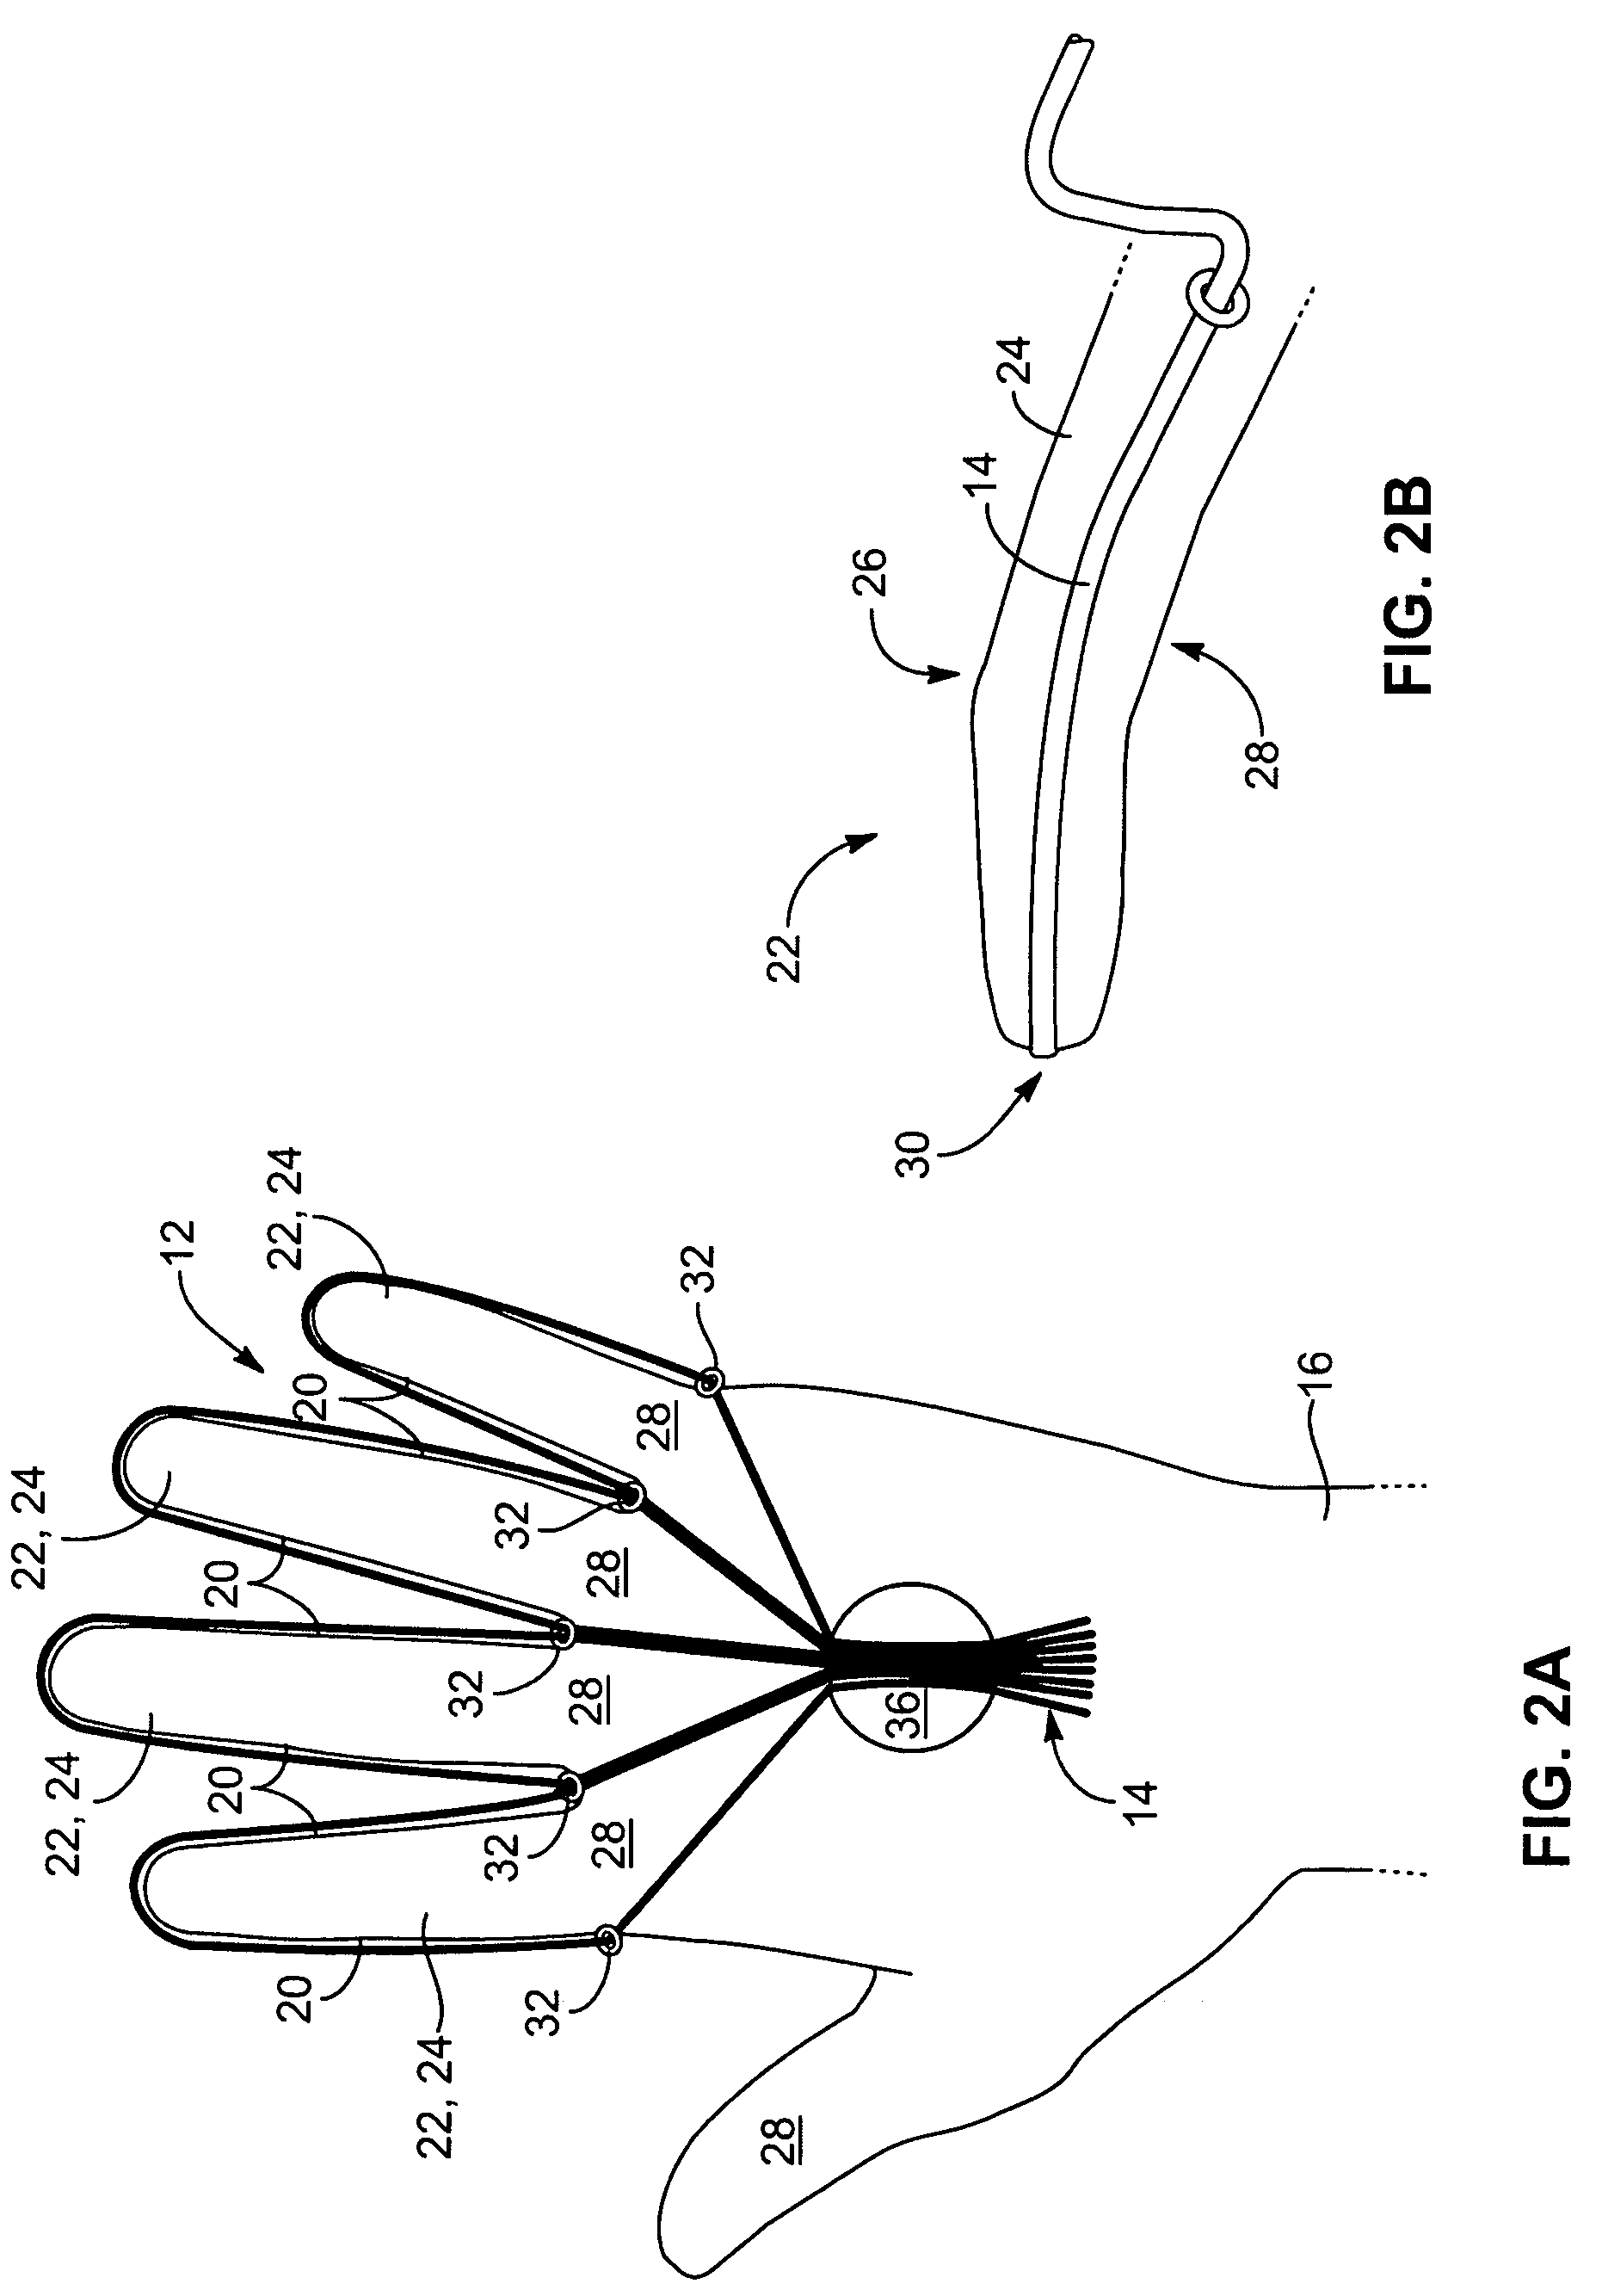 Grip enhancing glove and method for maintaining a grip that enables a user to maintain a prolonged grip without incurring undesirable effects